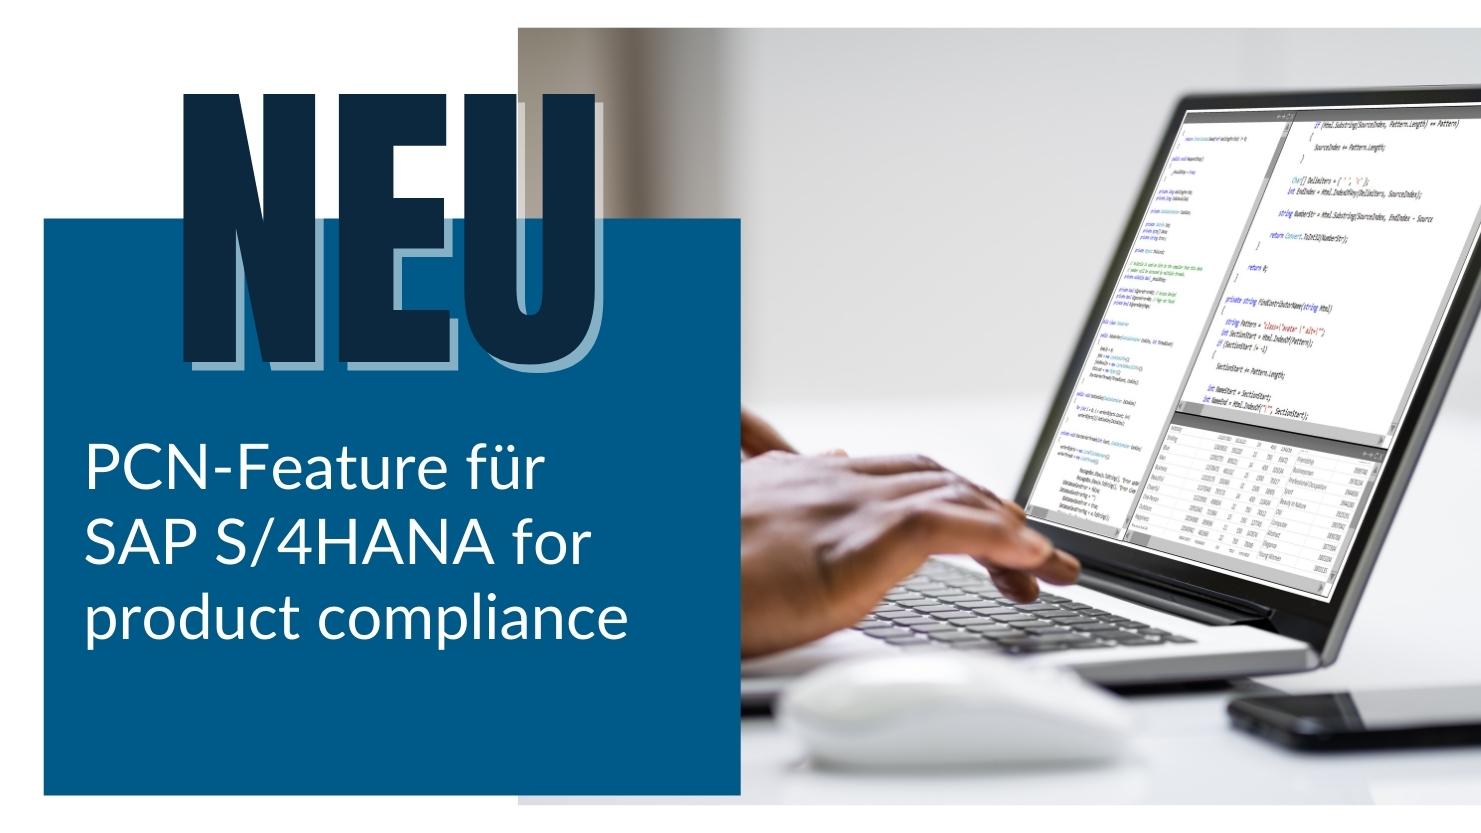 PCN-Funktion von SAP S/4HANA for product compliance